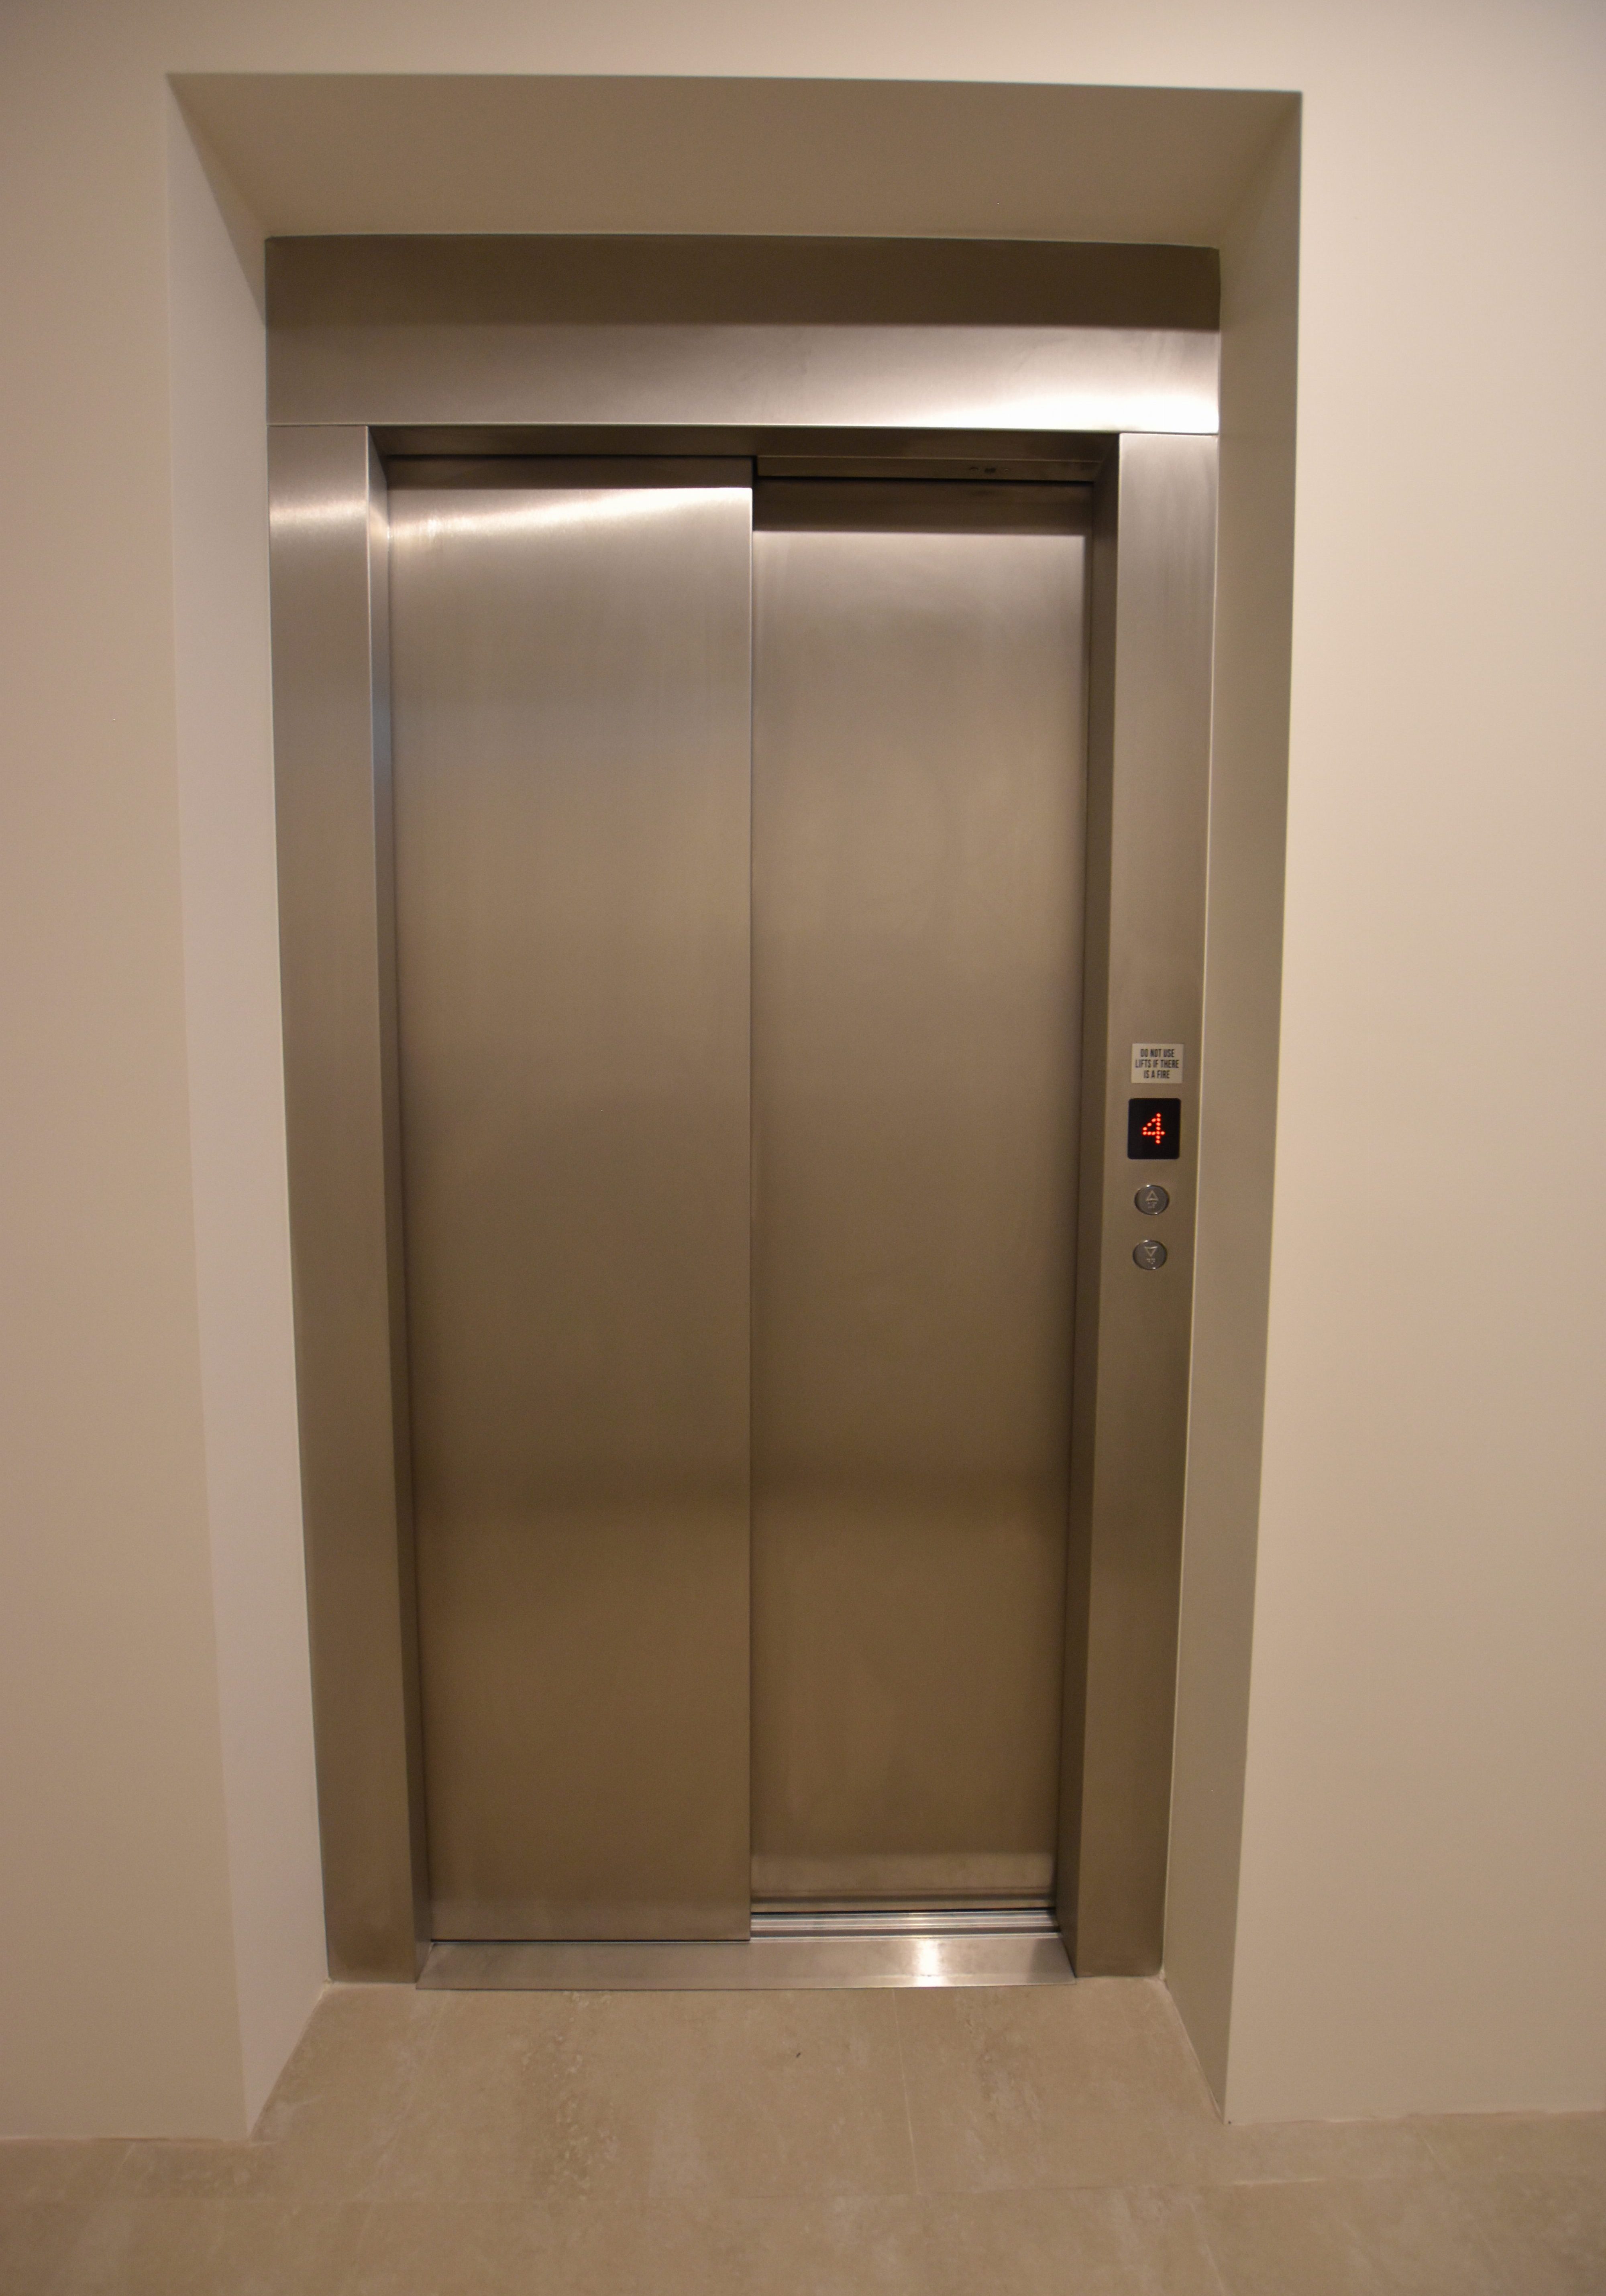 The steel door of the DDA compliant commercial lift that West Coast Elevators supplied and installed